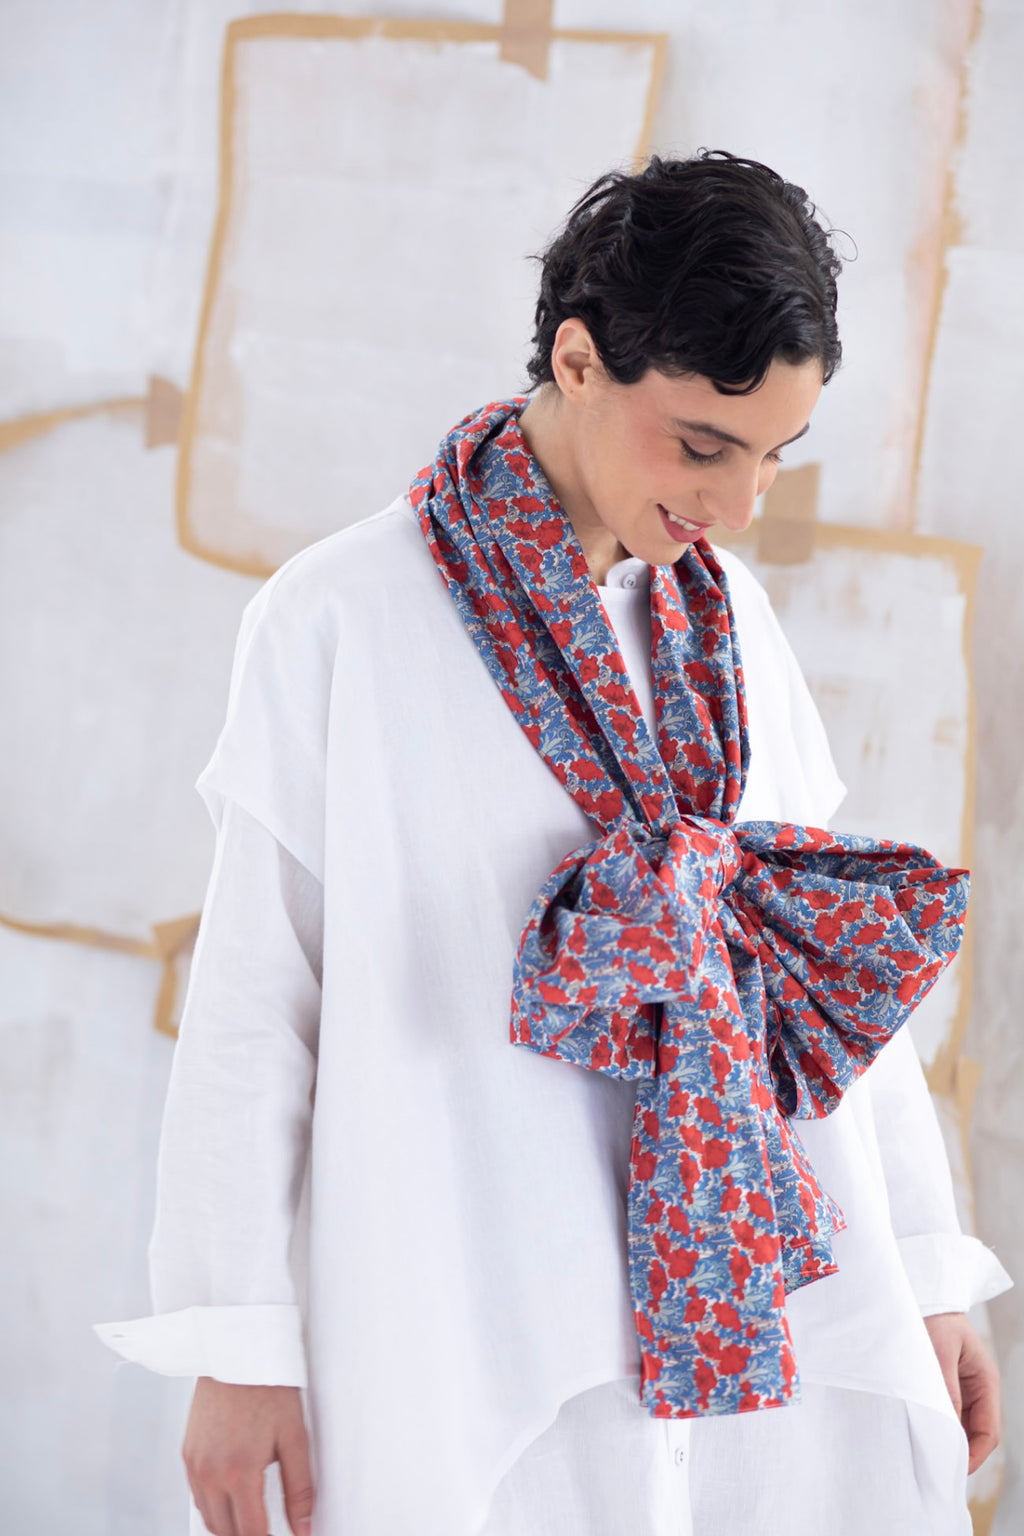 Obi Scarf | Made with Liberty Fabric | Clementina